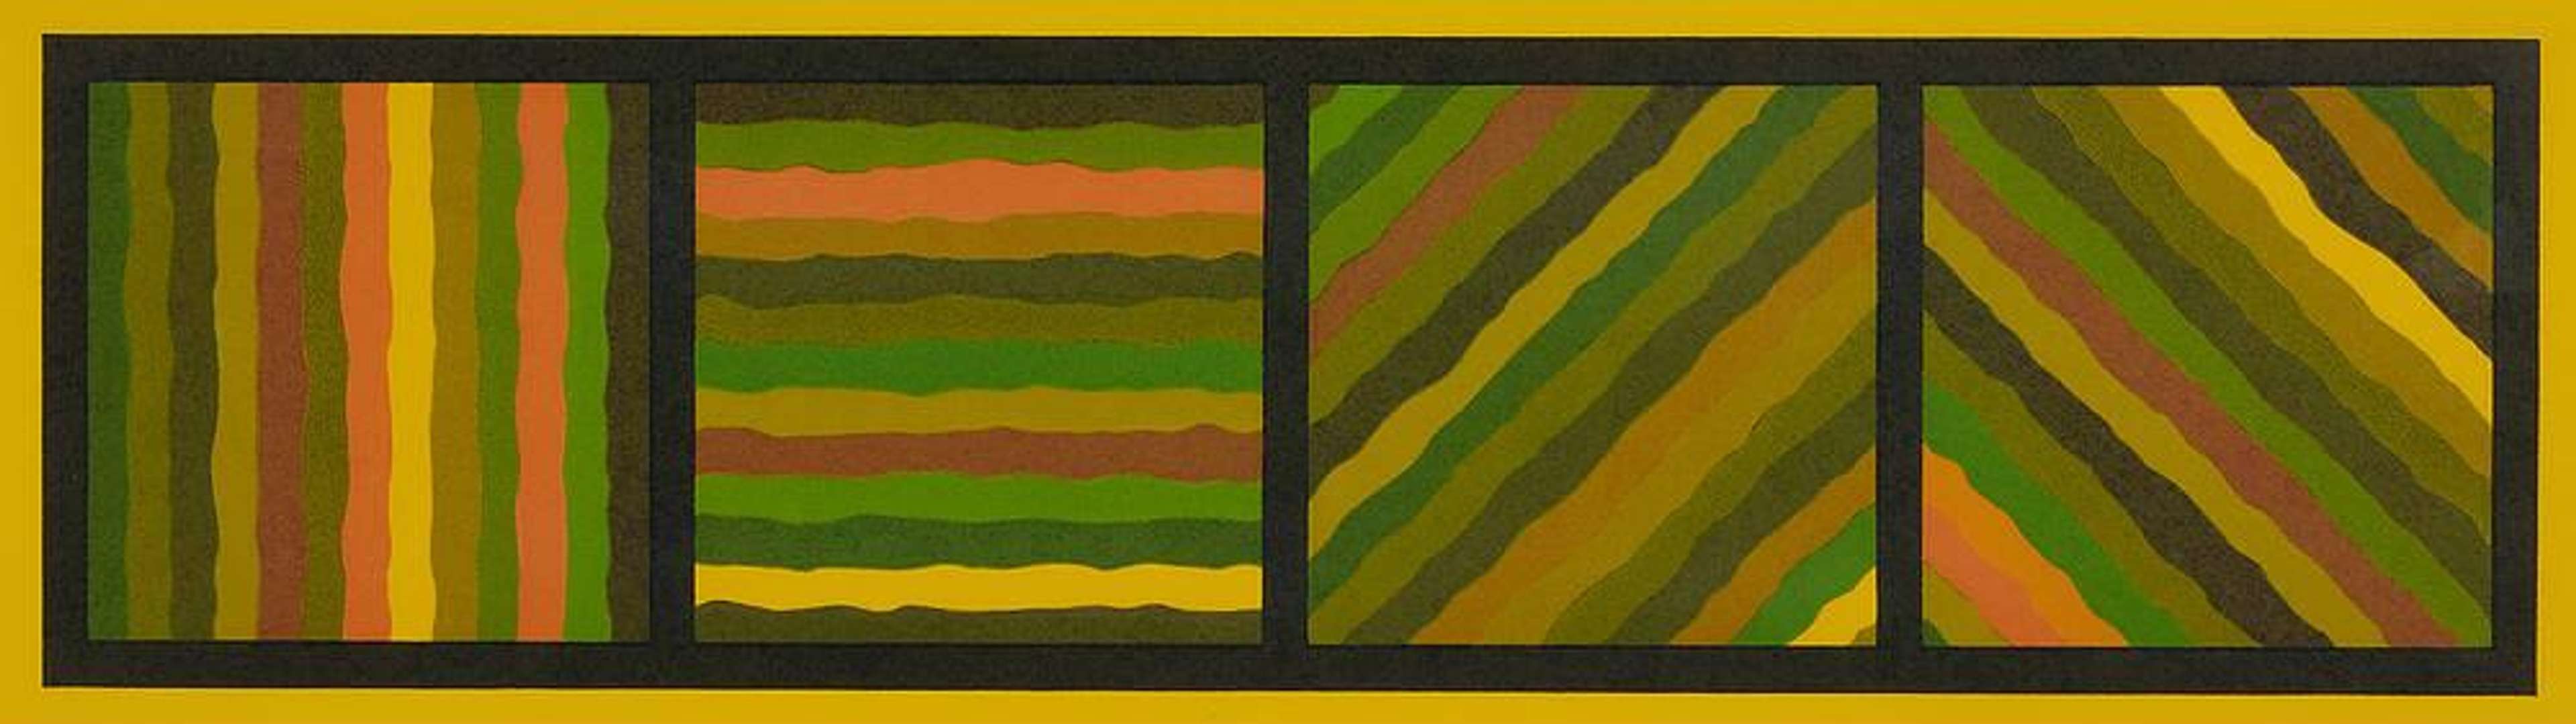 Bands (Not Straight) In Four Directions - Signed Print by Sol Lewitt 1987 - MyArtBroker